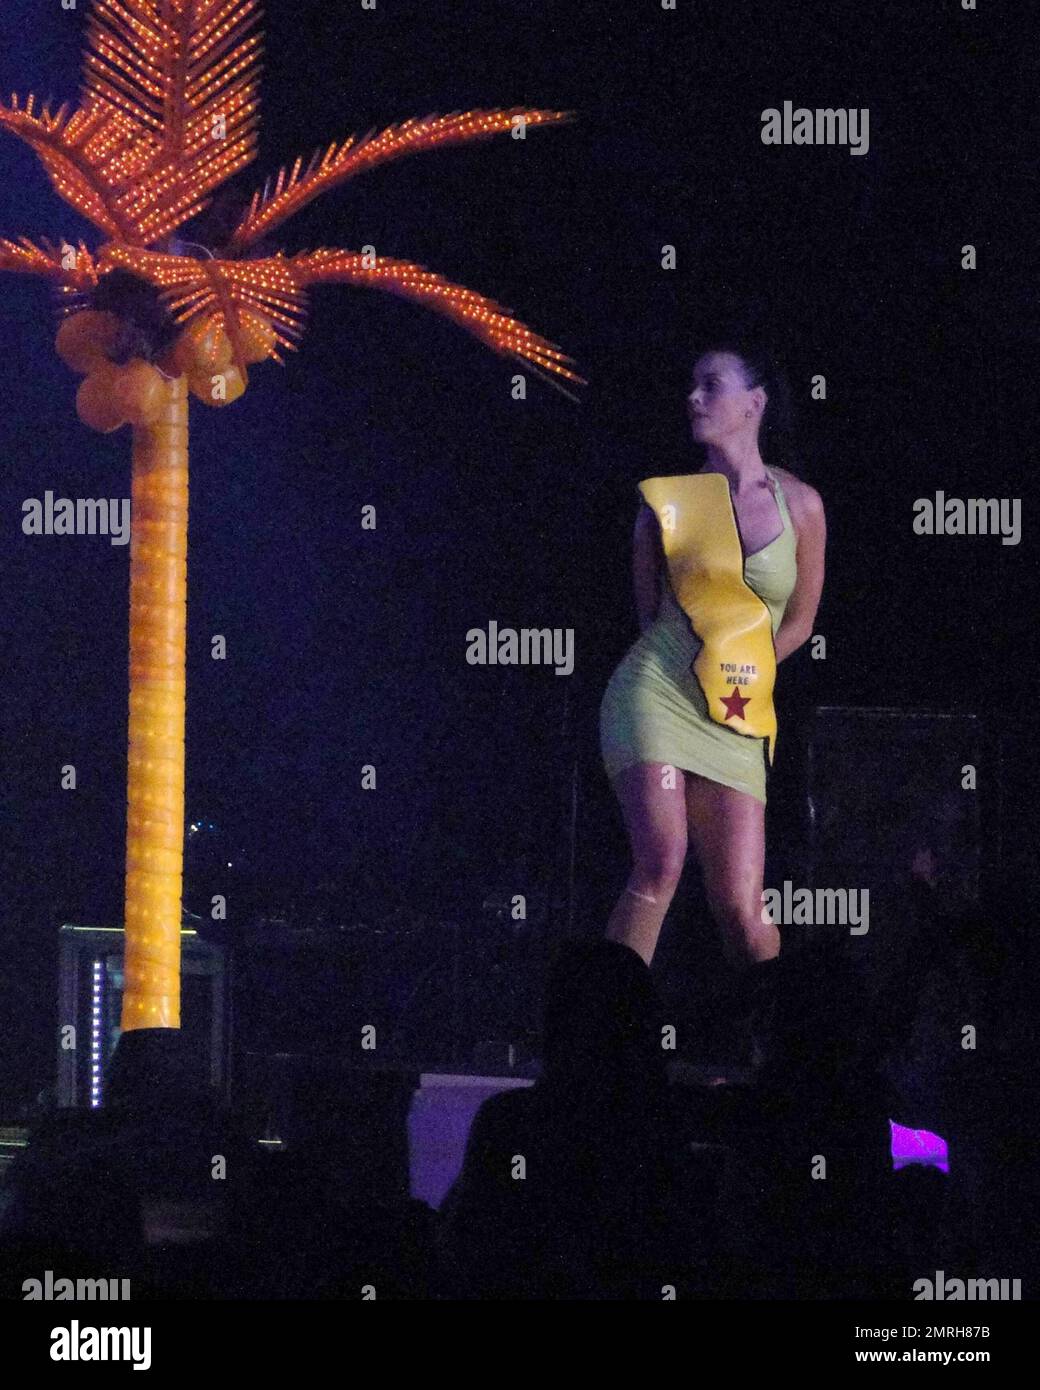 International singer-songwriter Katy Perry performs live at Atlantis Paradise Island in the Grand Ballroom.  Perry performed to Atlantis guests wearing a lime green rubber dress adorned with a yellow map  of what appeared to be California State and a 'you are here' red star.   In true Perry style the stage was decked out with Neon Palm Trees and bouncing beach balls for the crowd.  Perry releases her new album 'Teenage Dream' in August which features her top ten single 'California Gurls' which is the fastest rising single to Top 10 radio in over four years.  Bahamas  7/17/2010   . Stock Photo